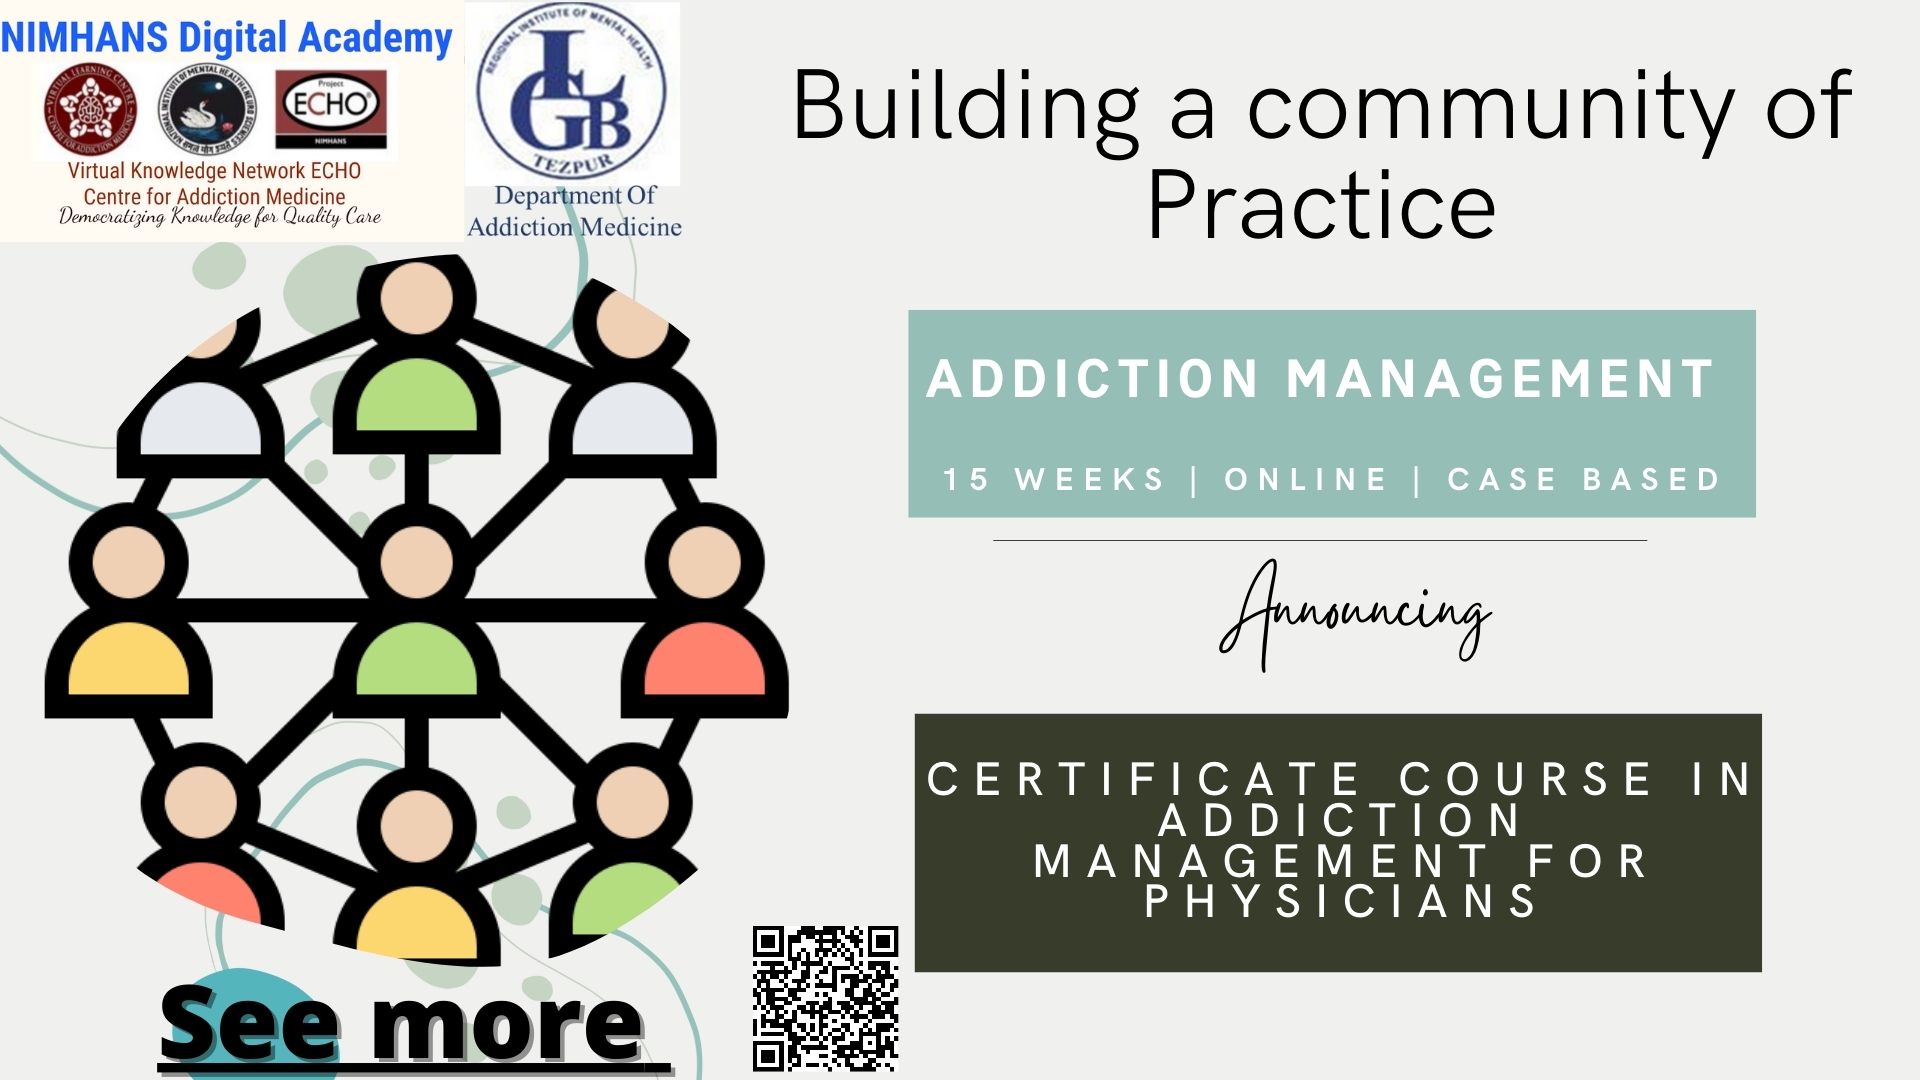 Completed: July 22- November 22: Certificate course on the Basics of Addiction Management for Doctors 13.0  